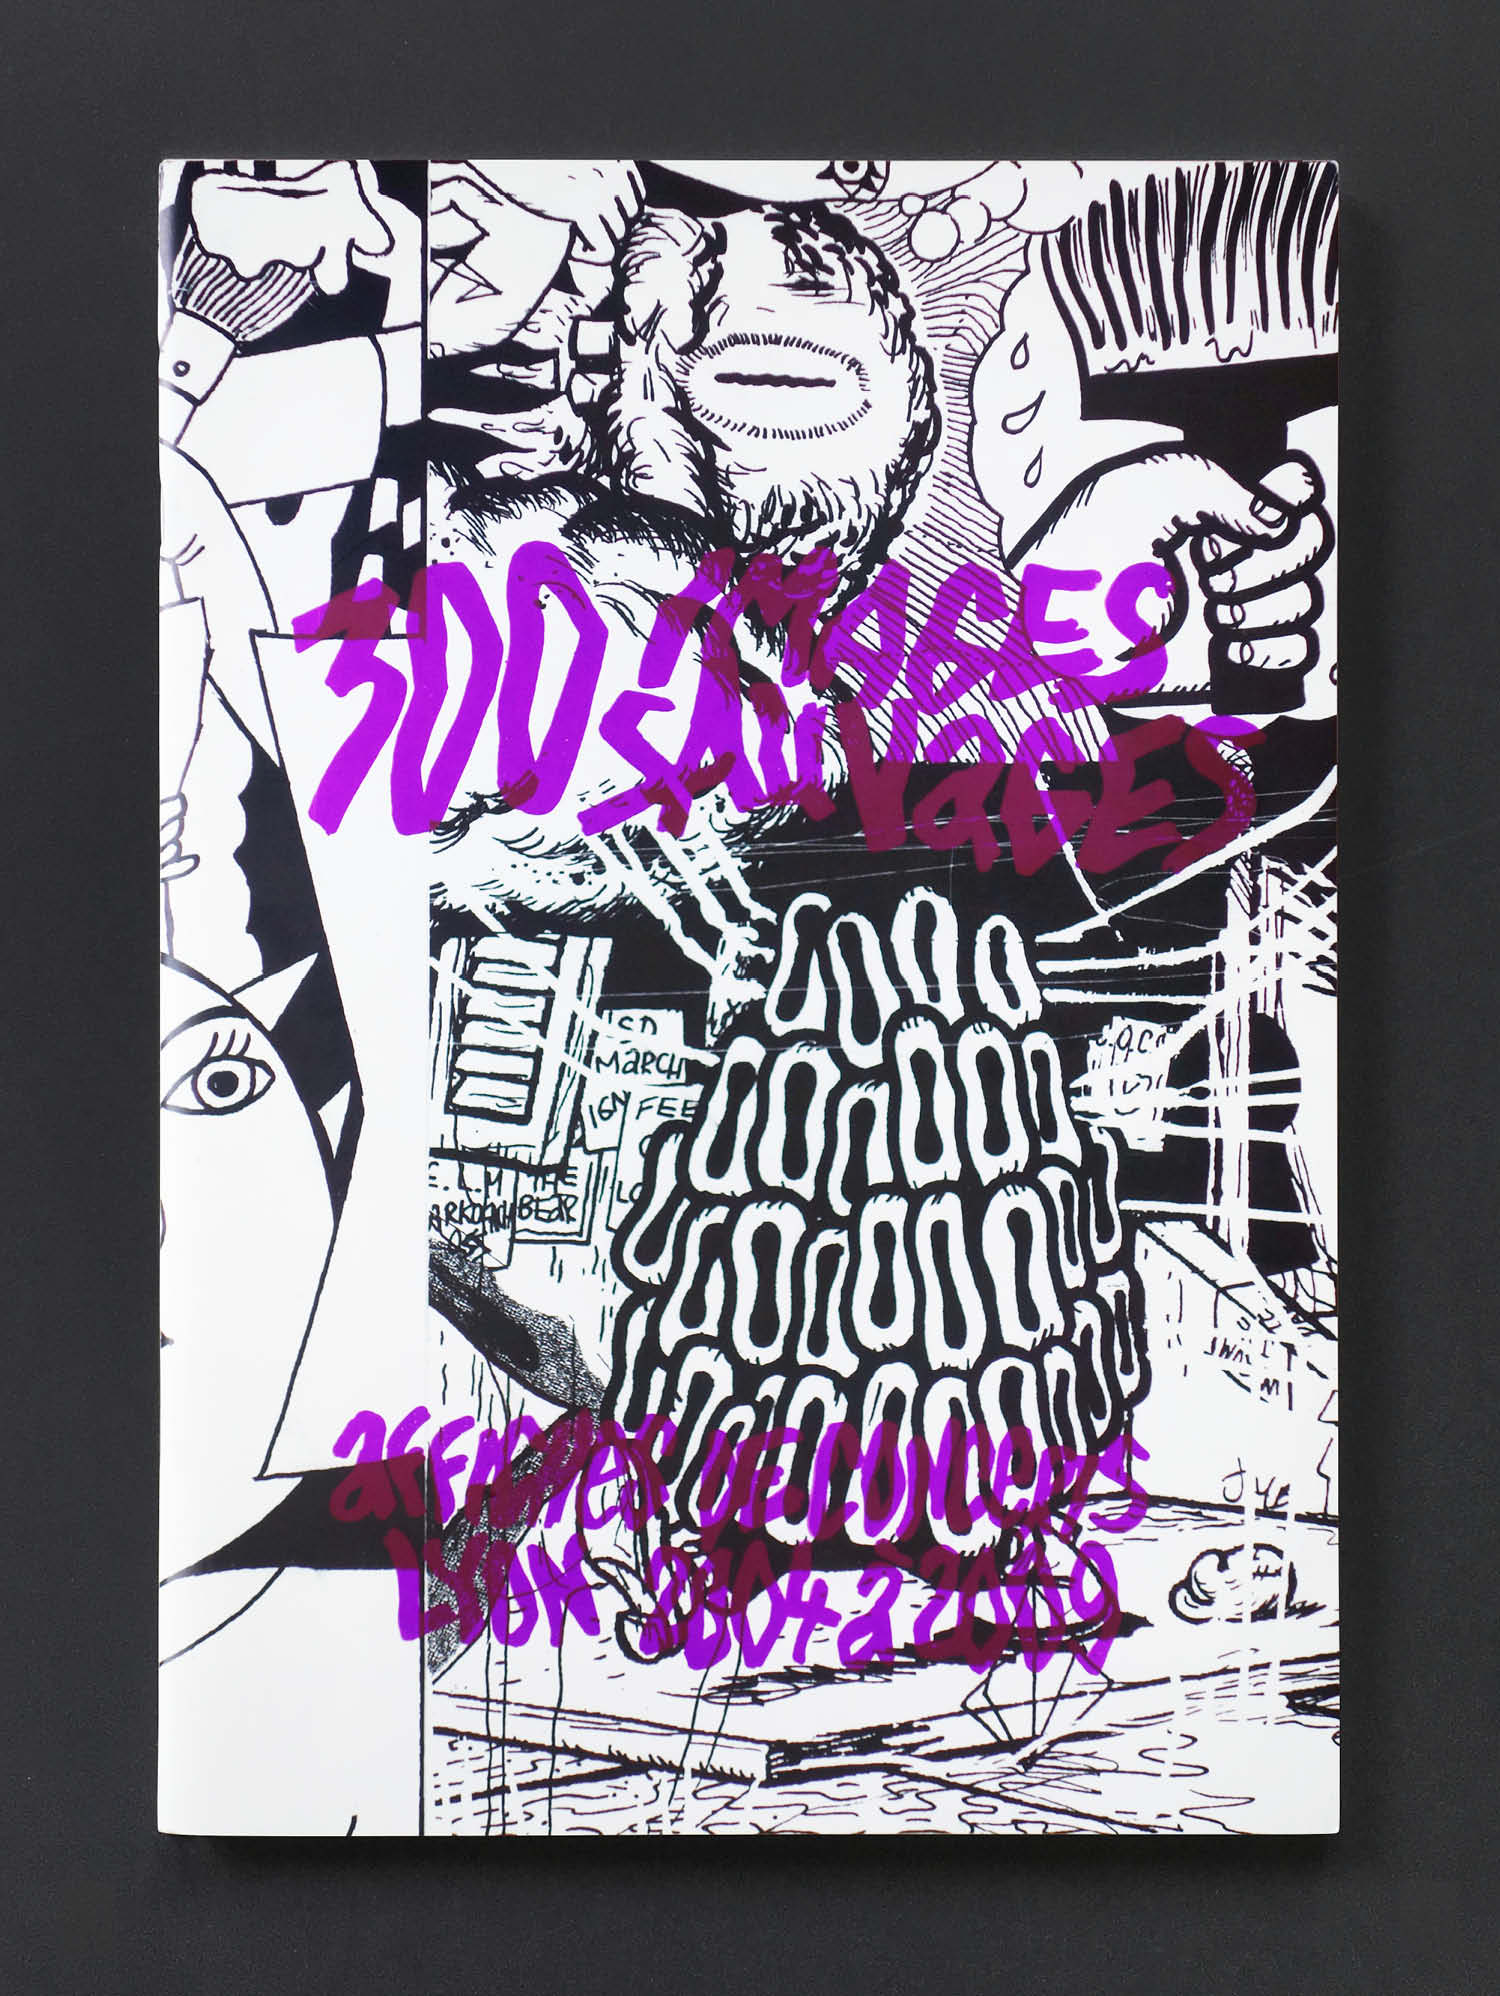 300 Images Sauvages gig posters